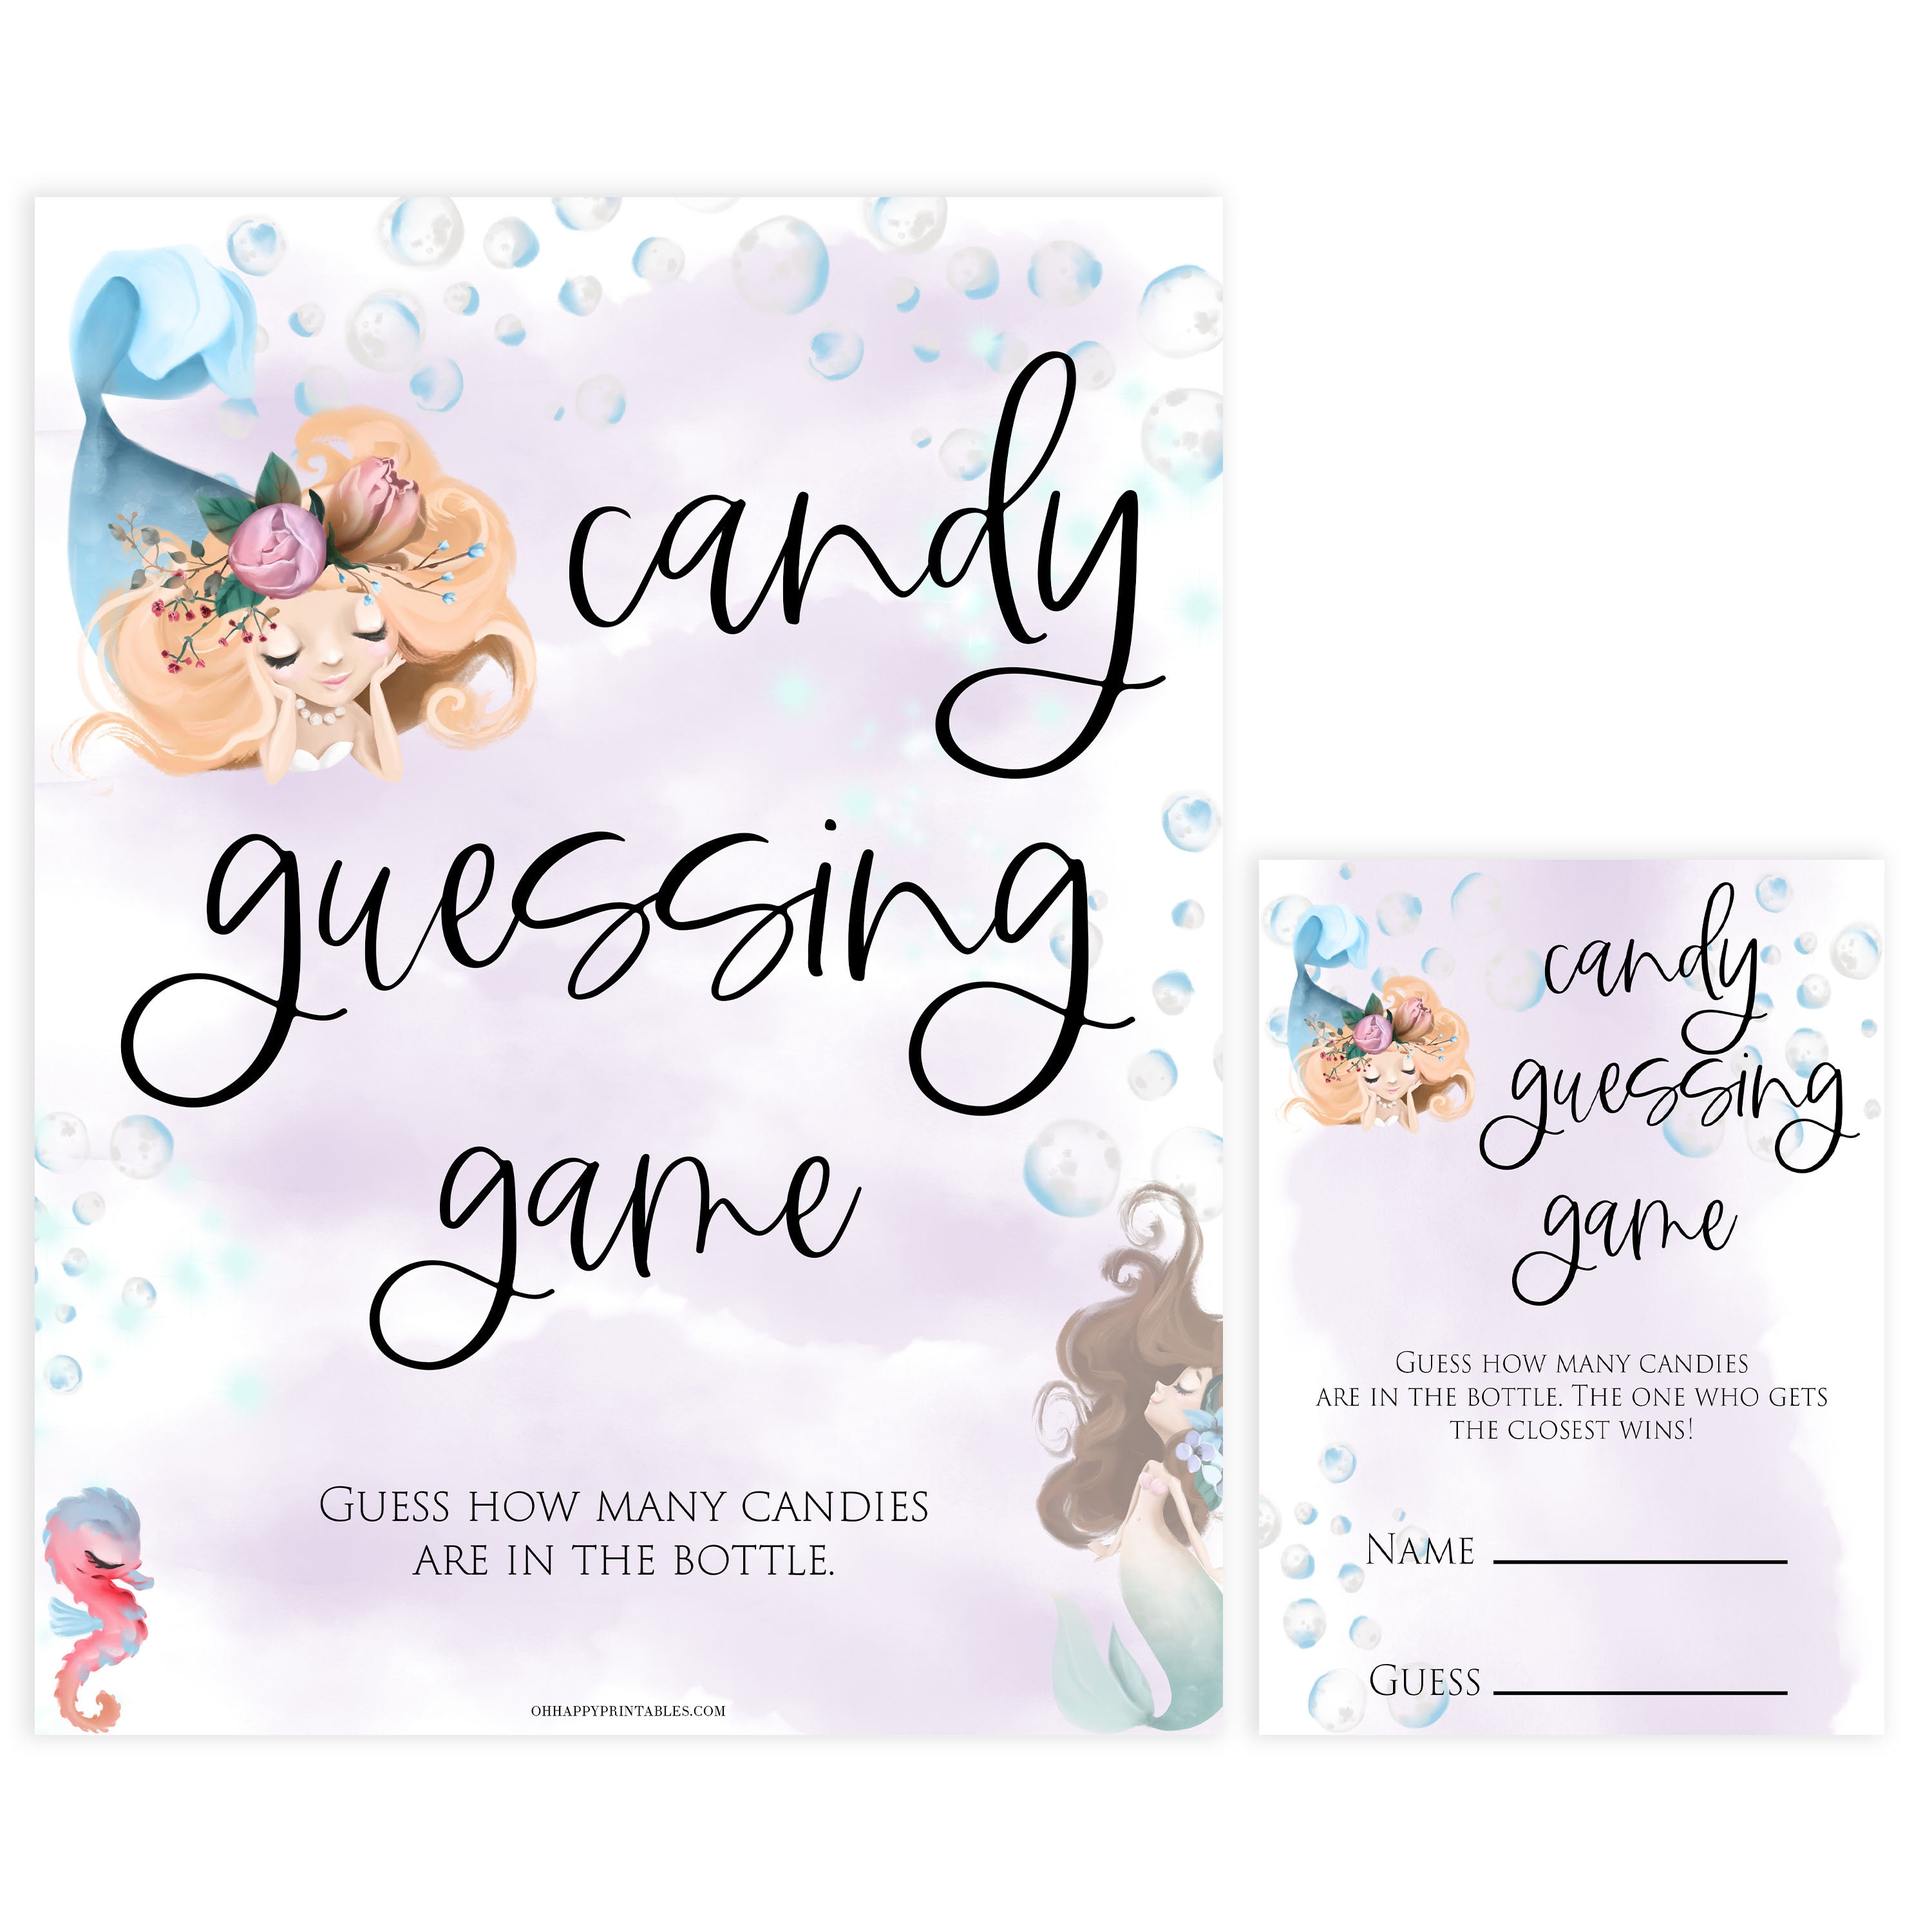 candy guessing game, Printable baby shower games, little mermaid baby games, baby shower games, fun baby shower ideas, top baby shower ideas, little mermaid baby shower, baby shower games, pink hearts baby shower ideas